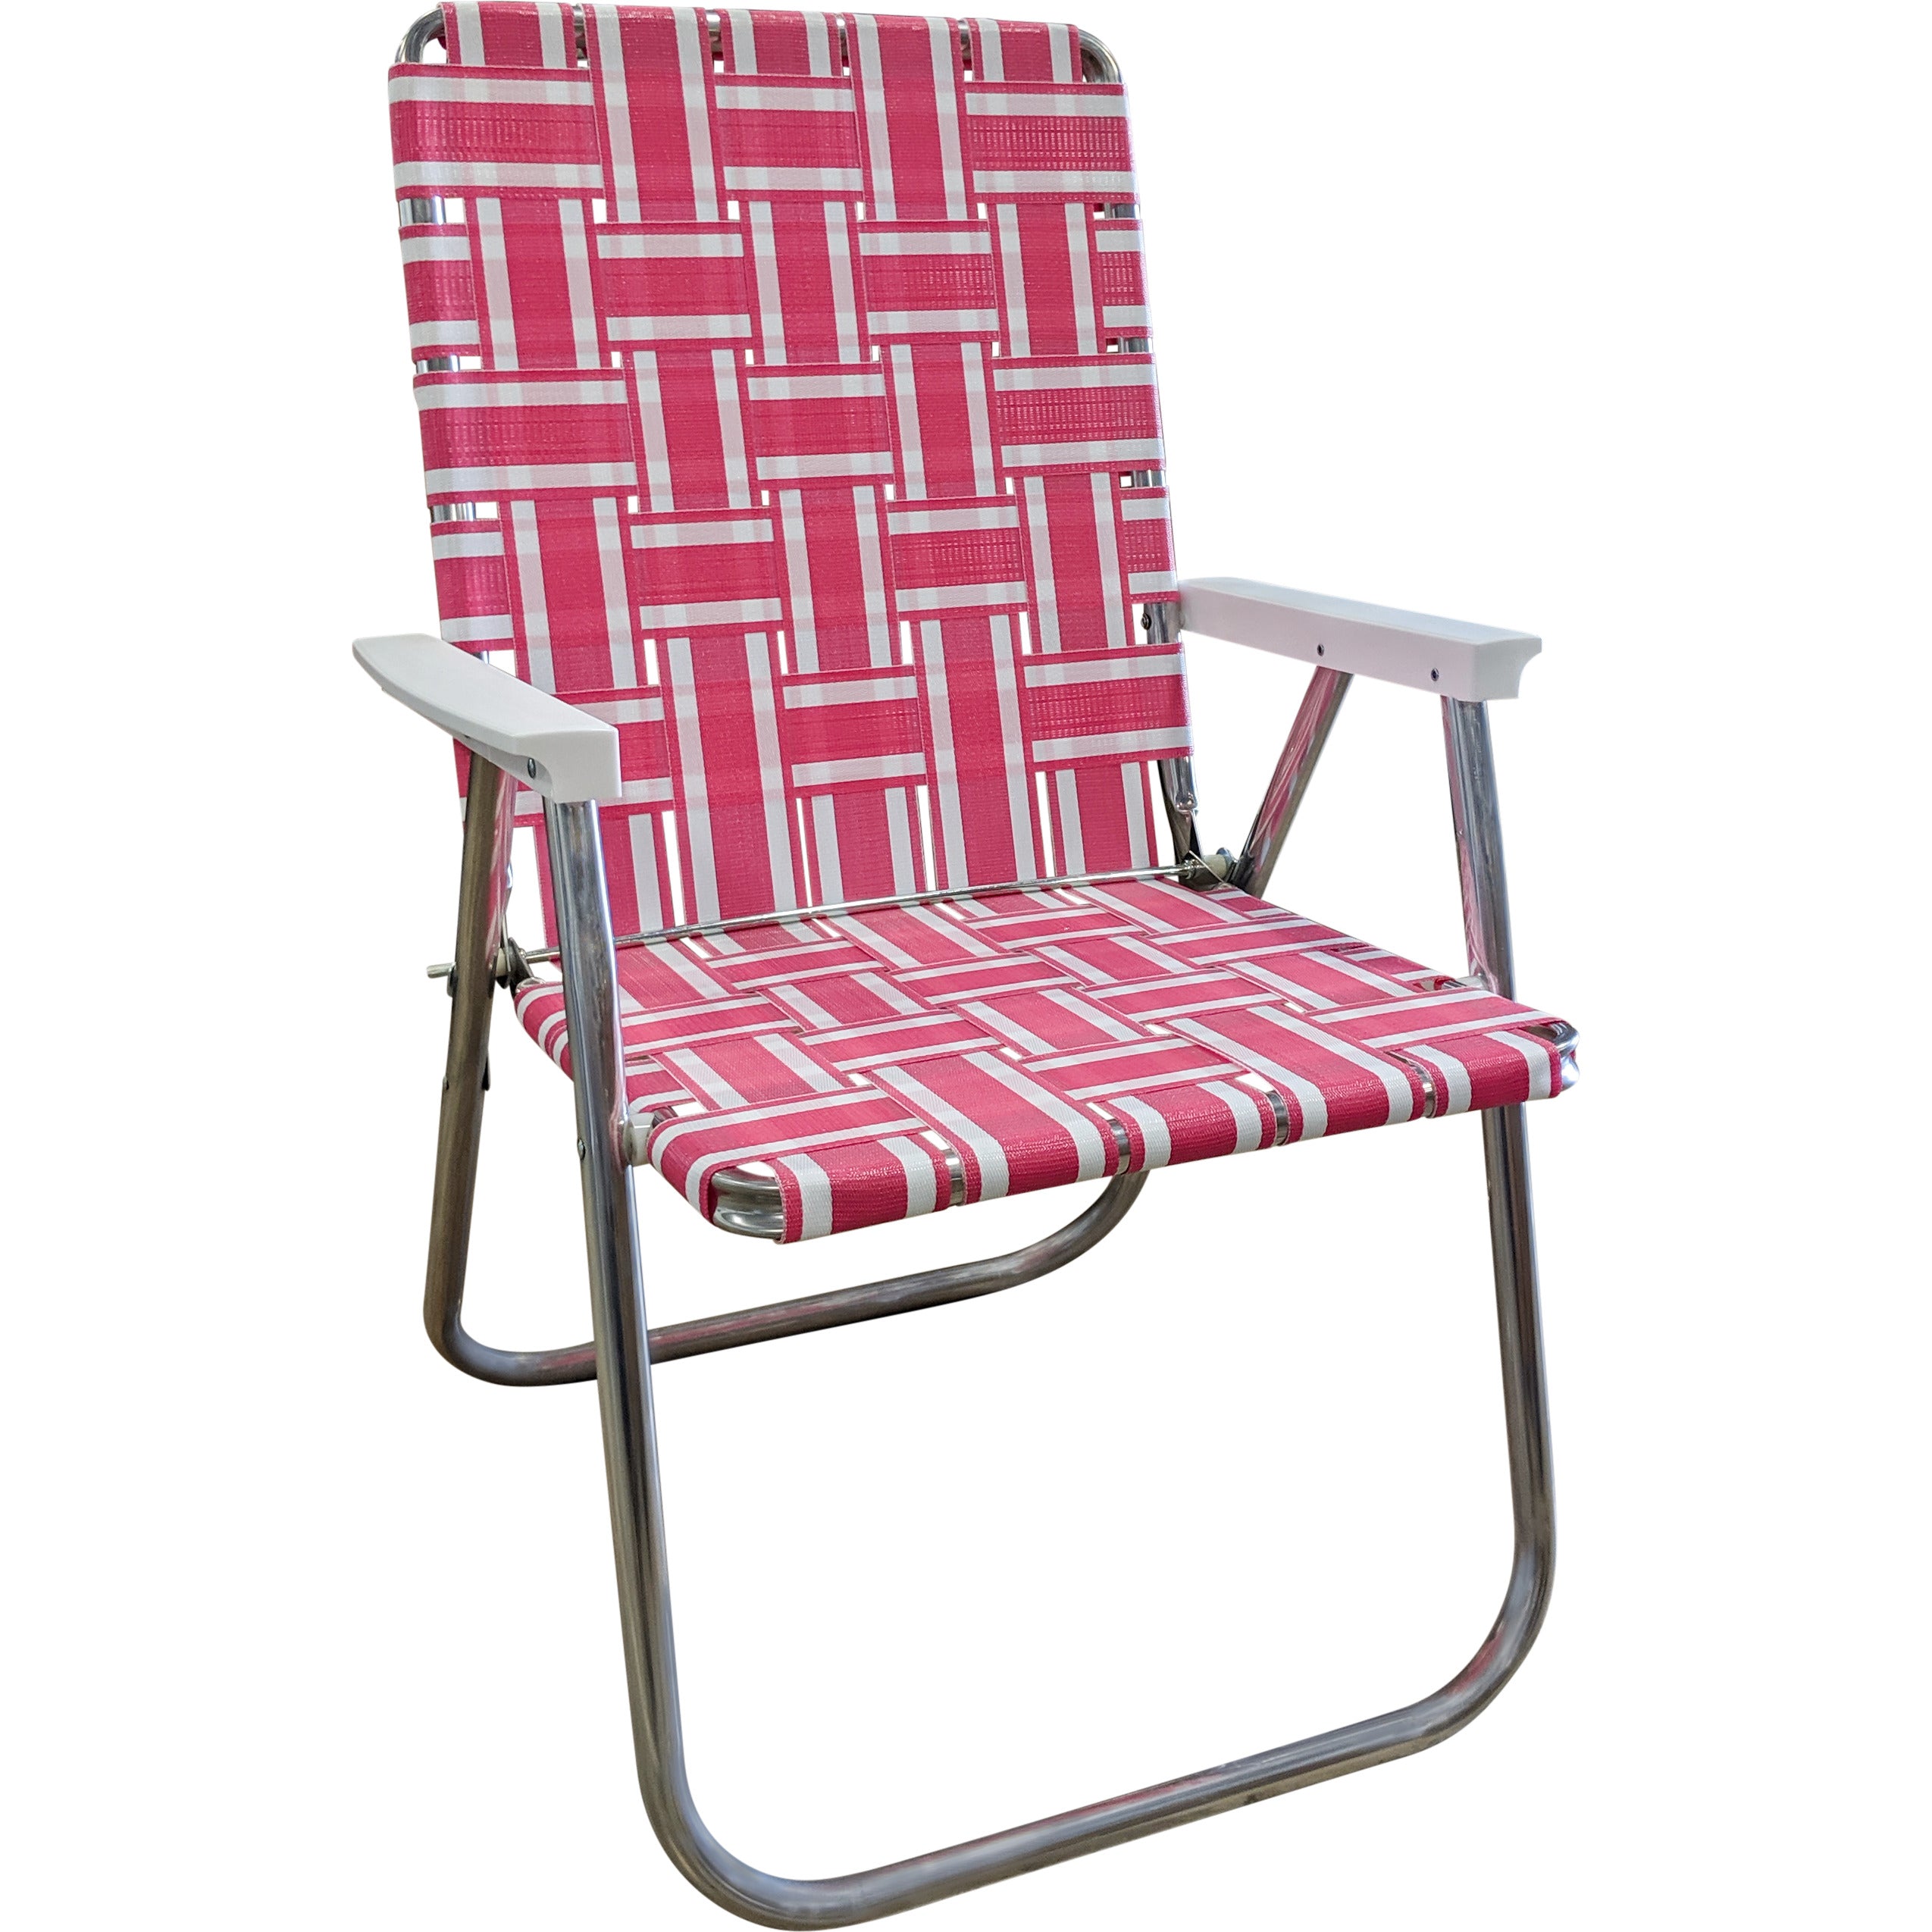 Free Shipping White And Pink Lawn Chair Lawn Chair Usa